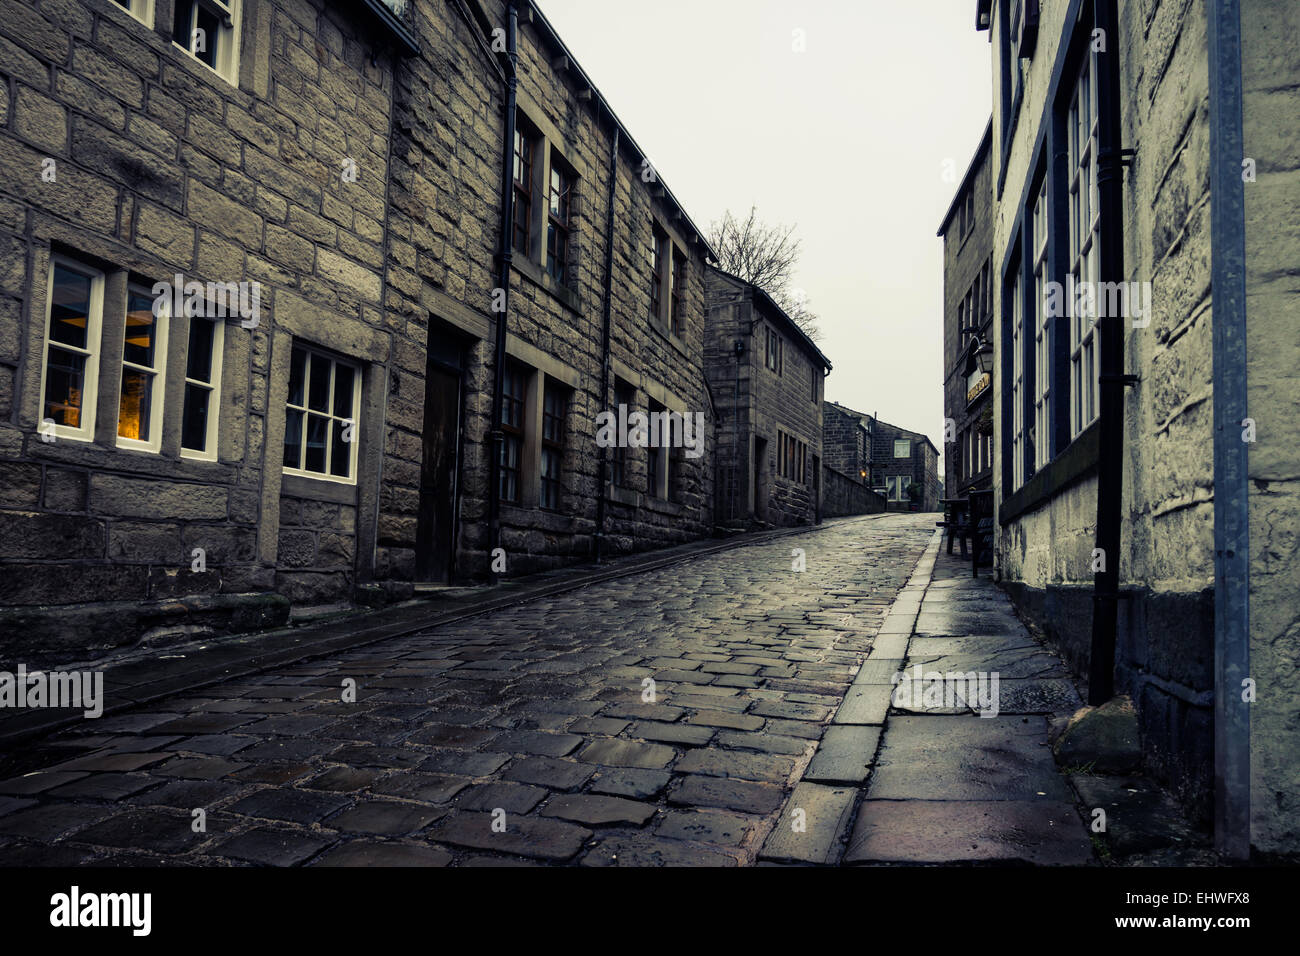 Houses on Town Gate cobbled street in Heptonstall, Yorkshire England on a wet winter day. December 2014 Stock Photo